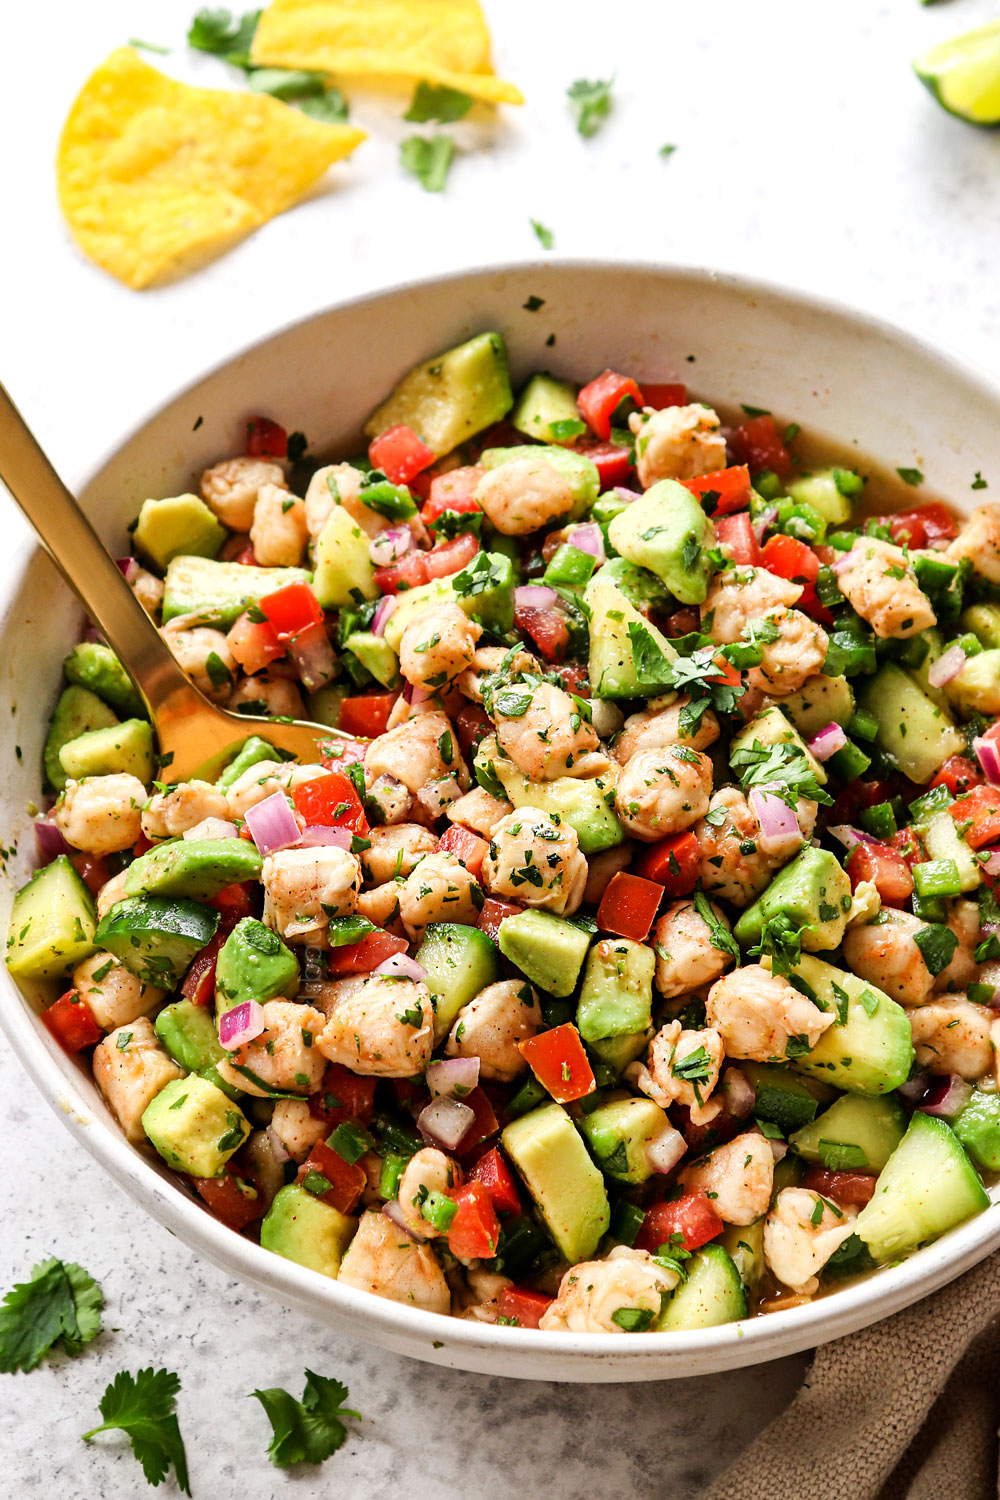 a bowl ceviche de camaron (shrimp ceviche) with tomatoes, cucumbers, avocados, red onions, jalapenos and cilantro